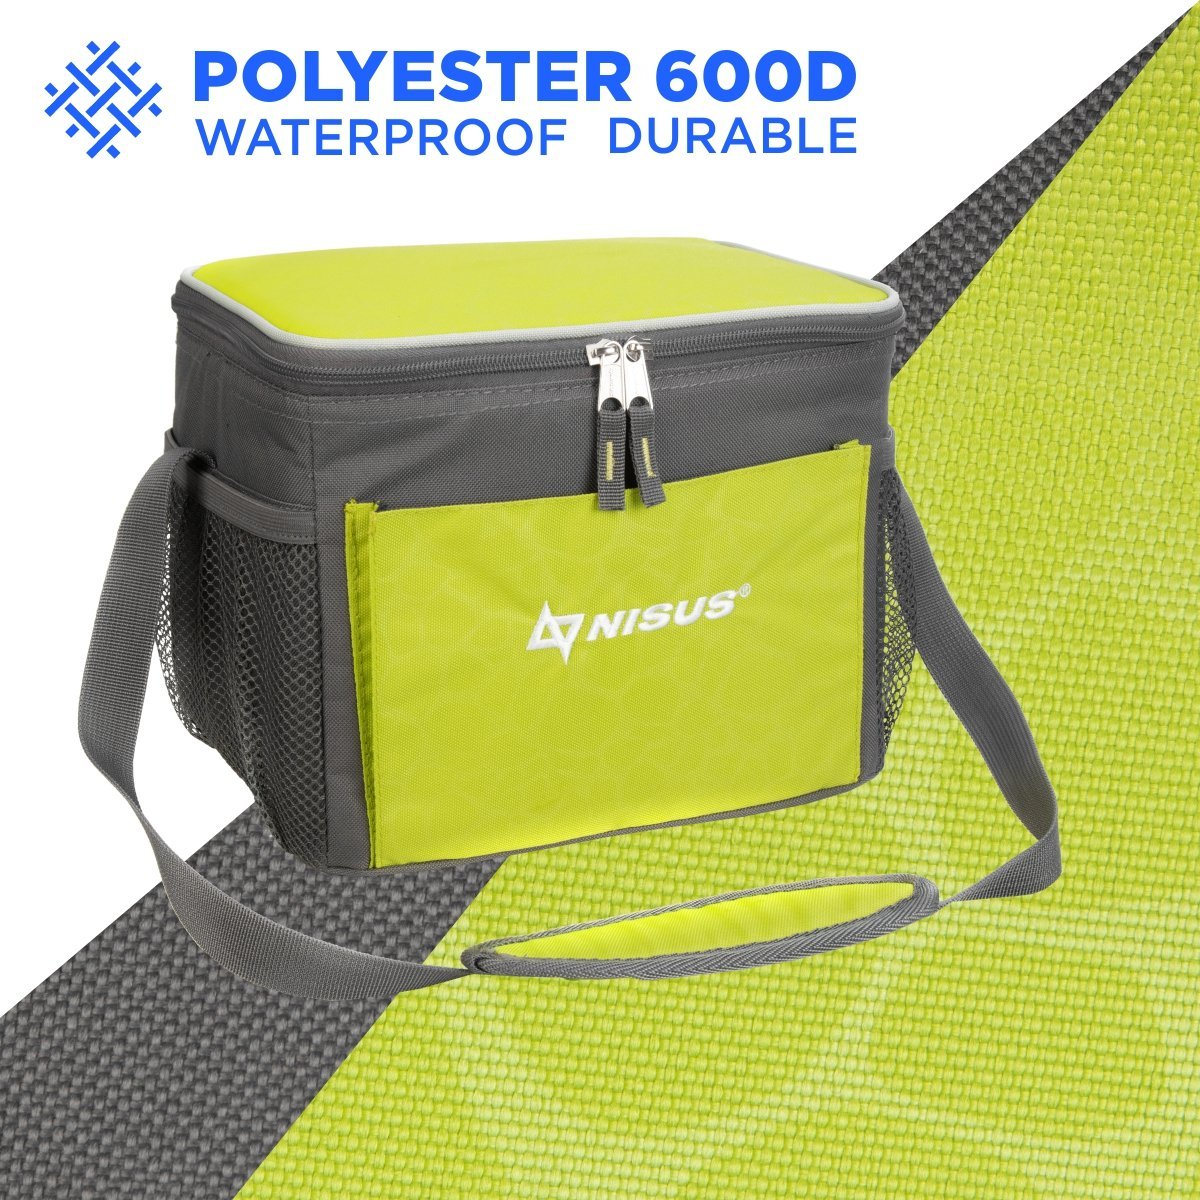 Th outer layer of Beach Soft Sided Cooler Bag is made of waterproof  polyester 600D